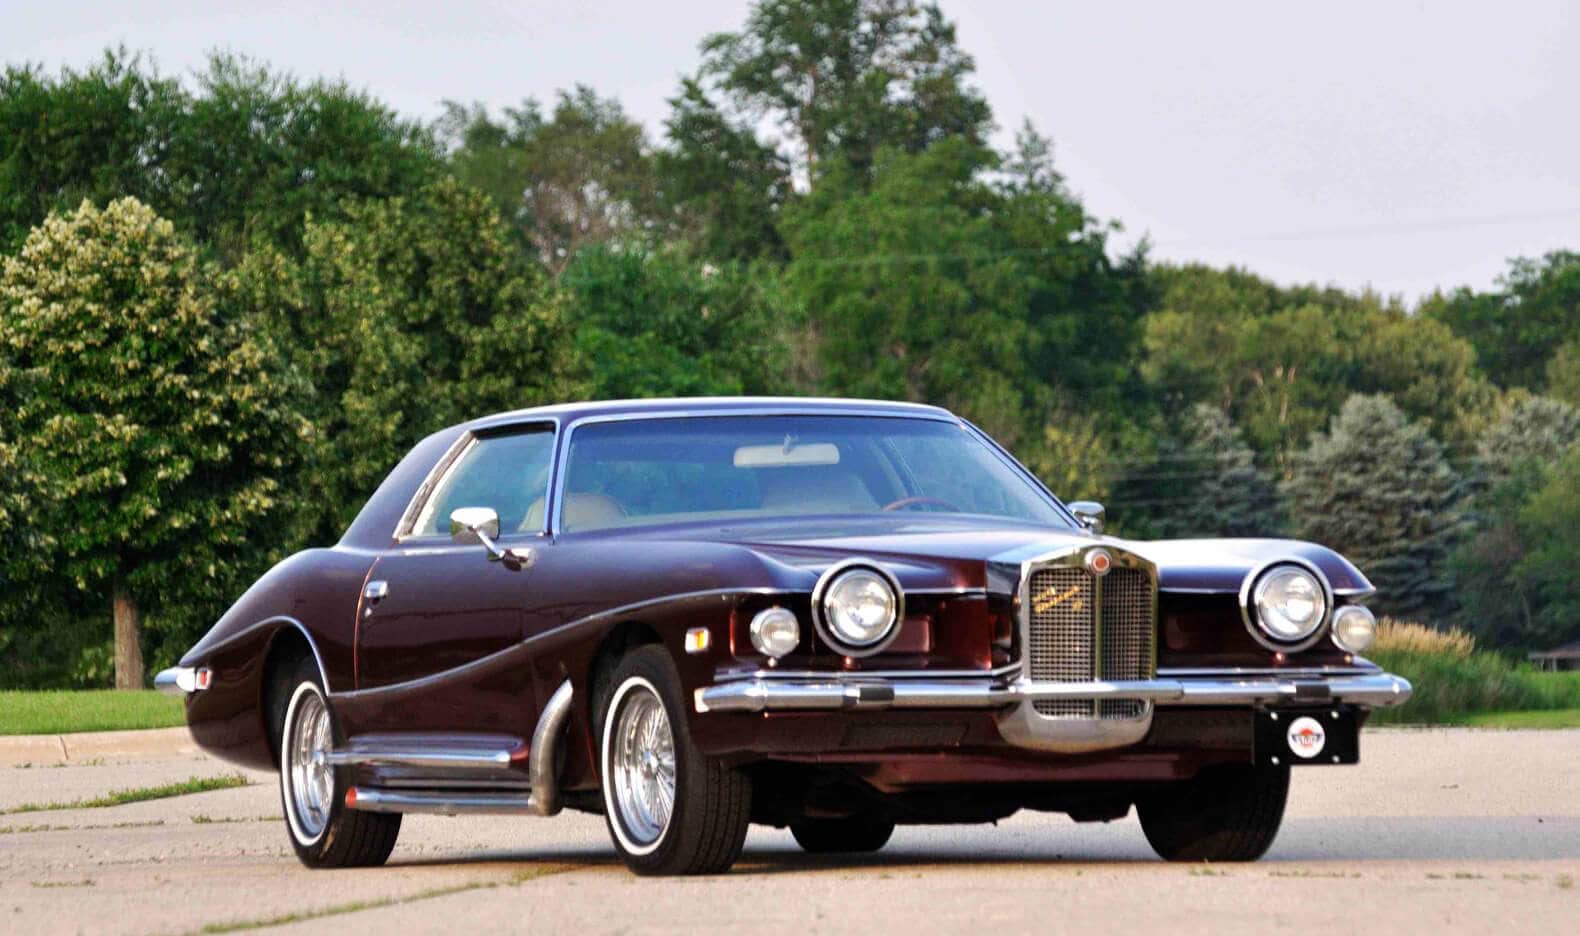 36 Classic American Luxury Cars From The '60s and '70s